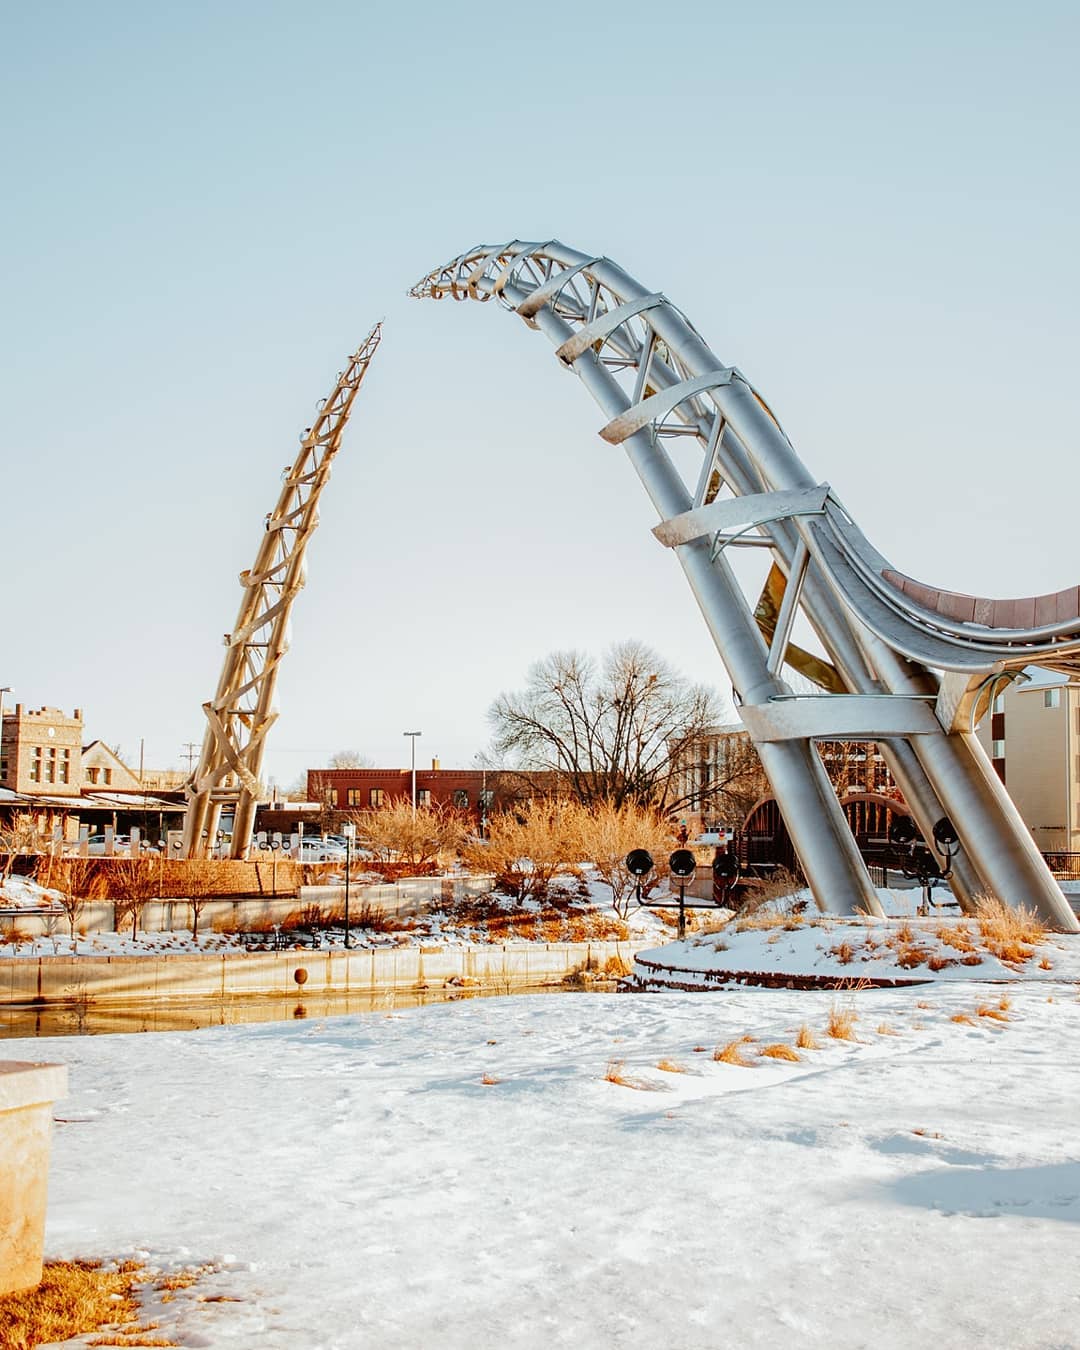 Arc of Dreams in Sioux Falls, SD photo by Instagram user @meditatetoelavate